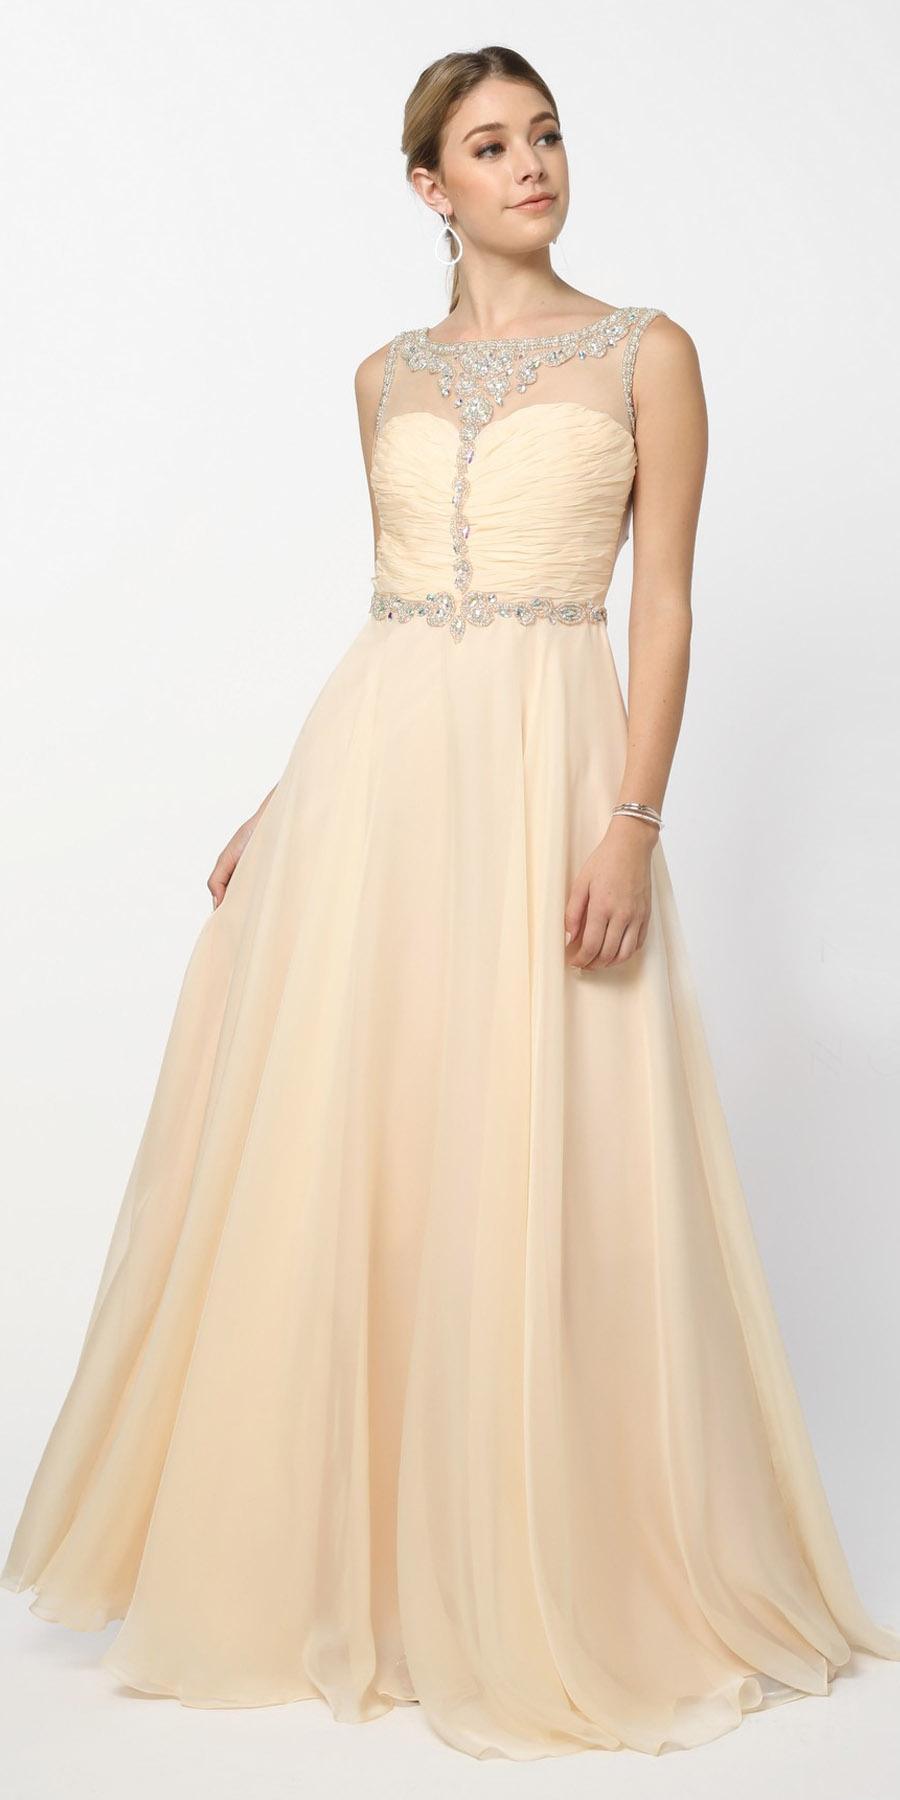 Nox Anabel 8155 Formal A Line Prom Gown Nude Chiffon A Line Bateau Neck